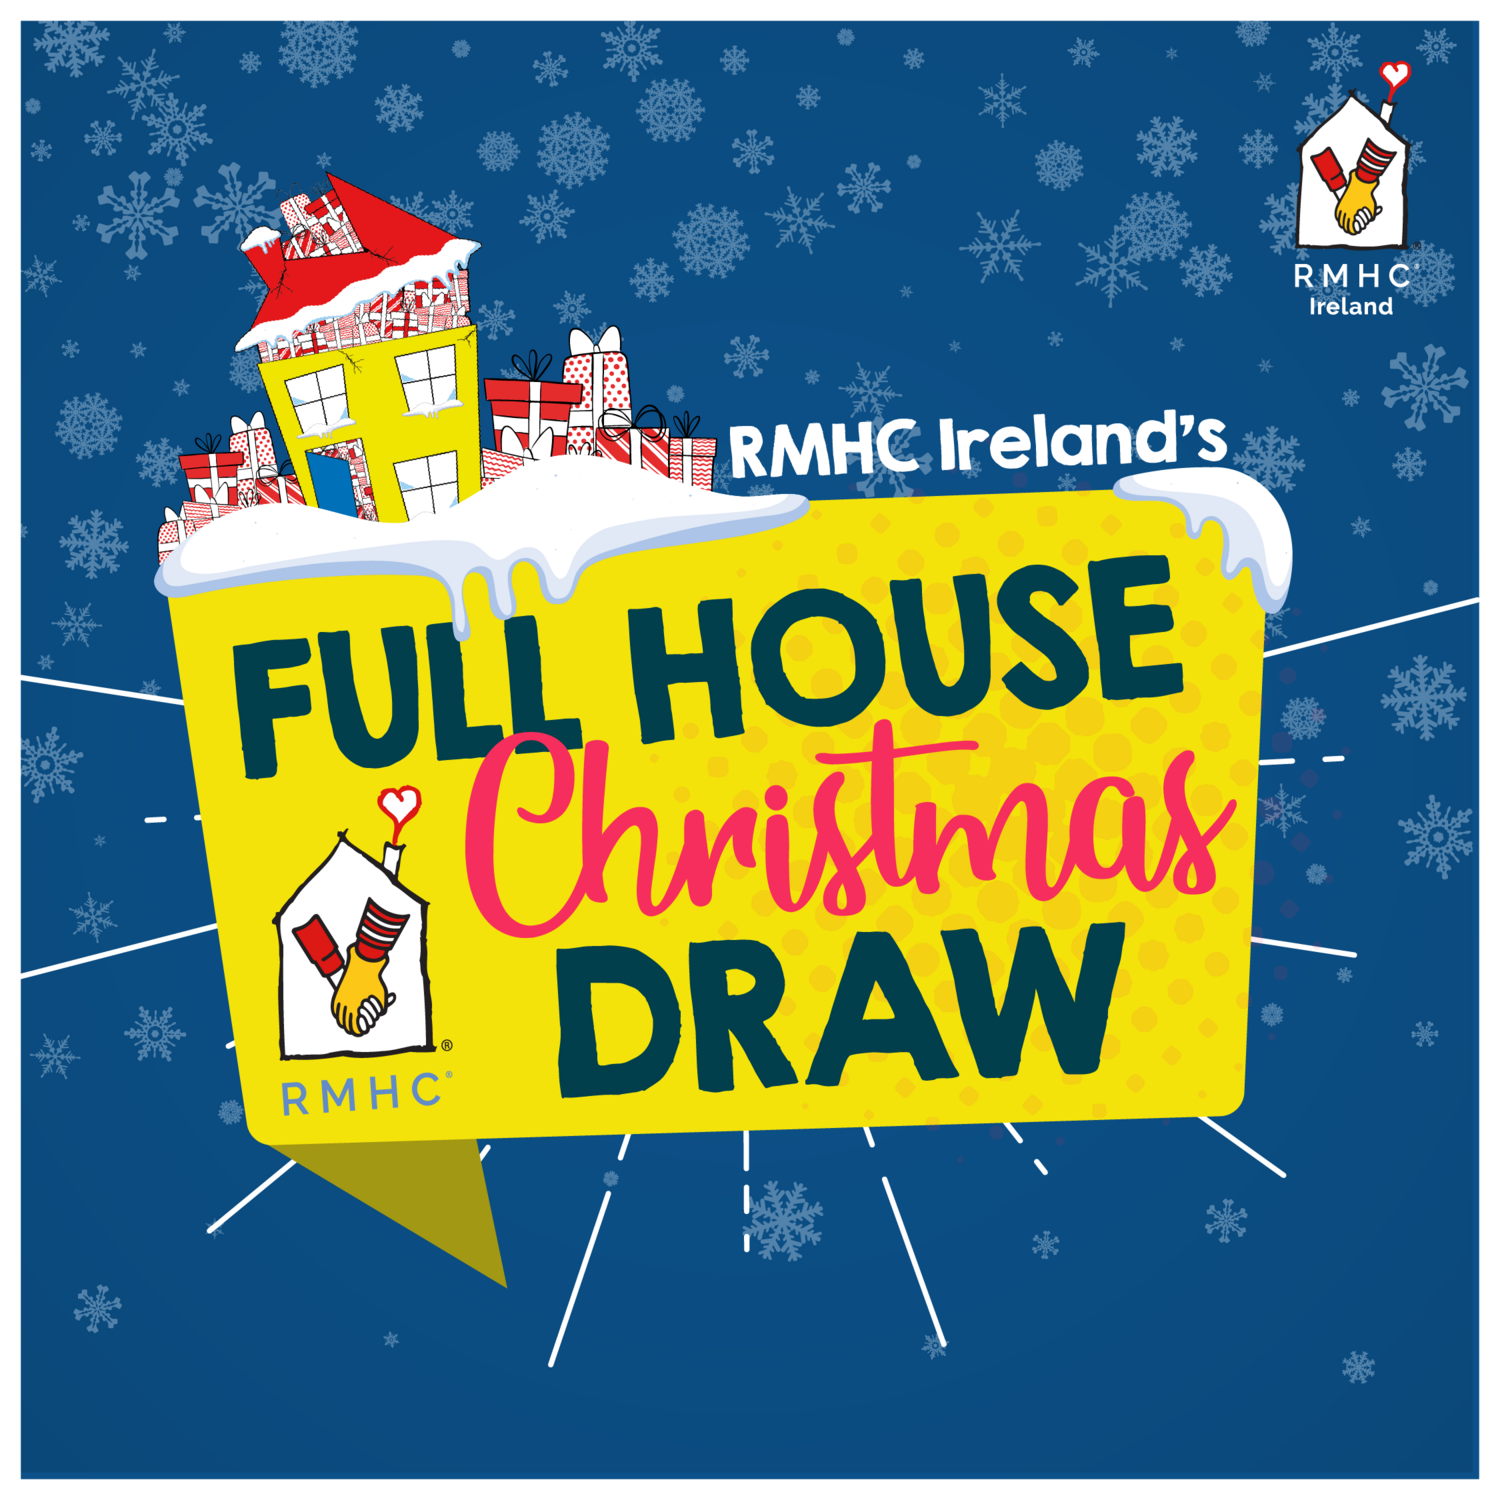 The Full House Christmas Draw